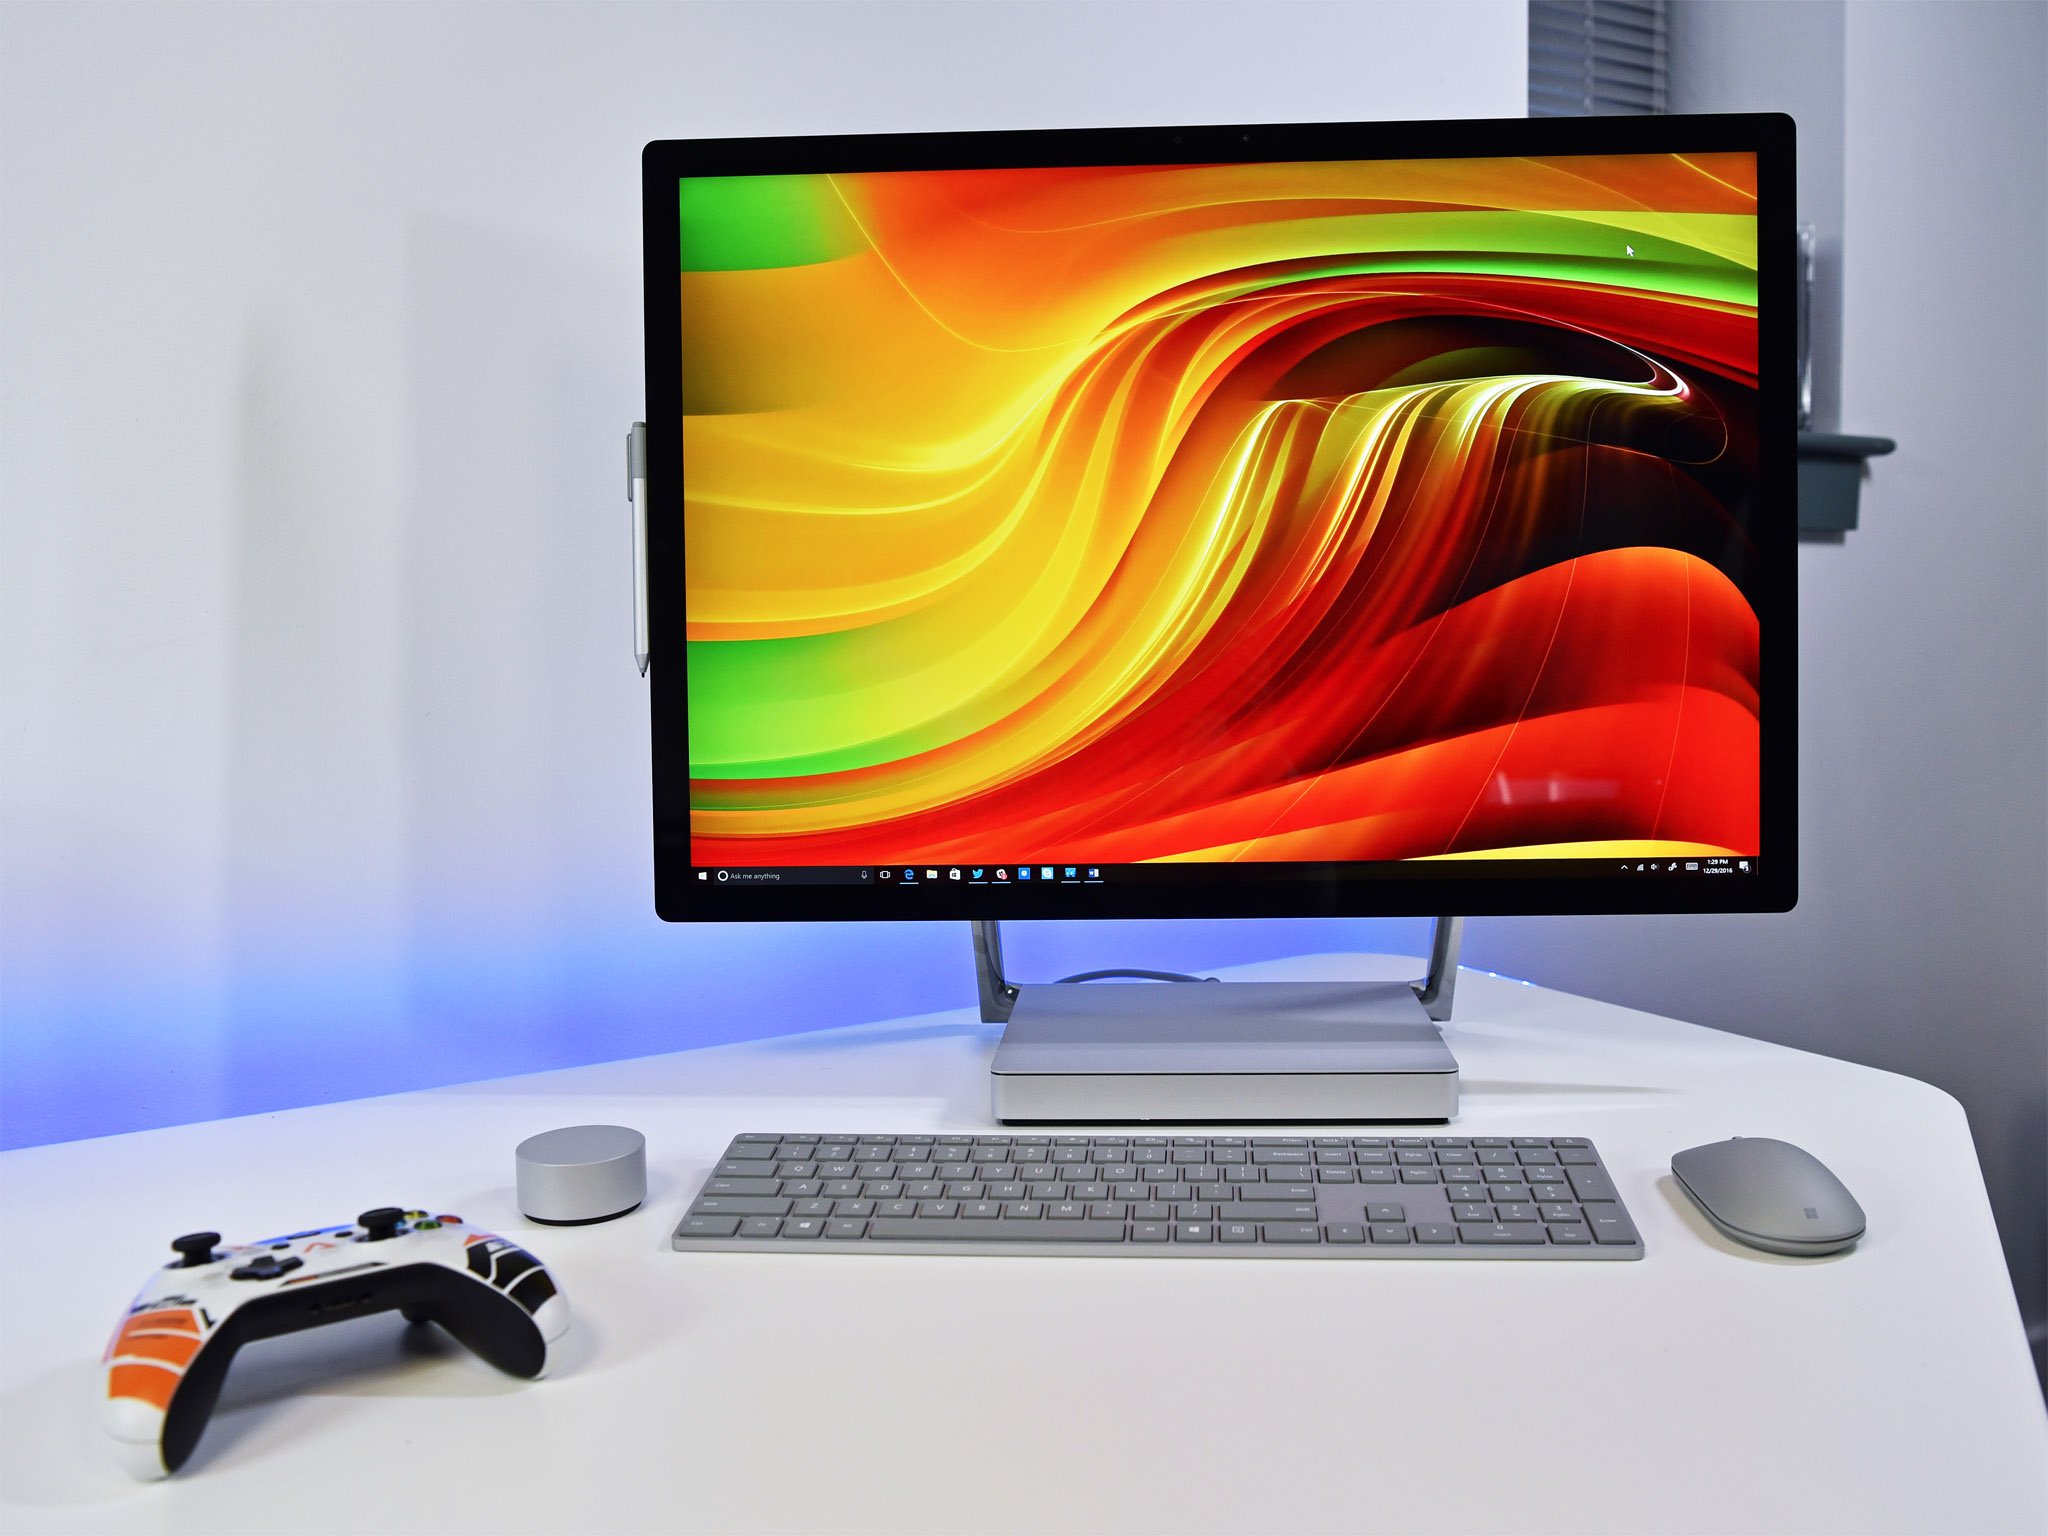 The benefits and downsides to buying an all-in-one PC